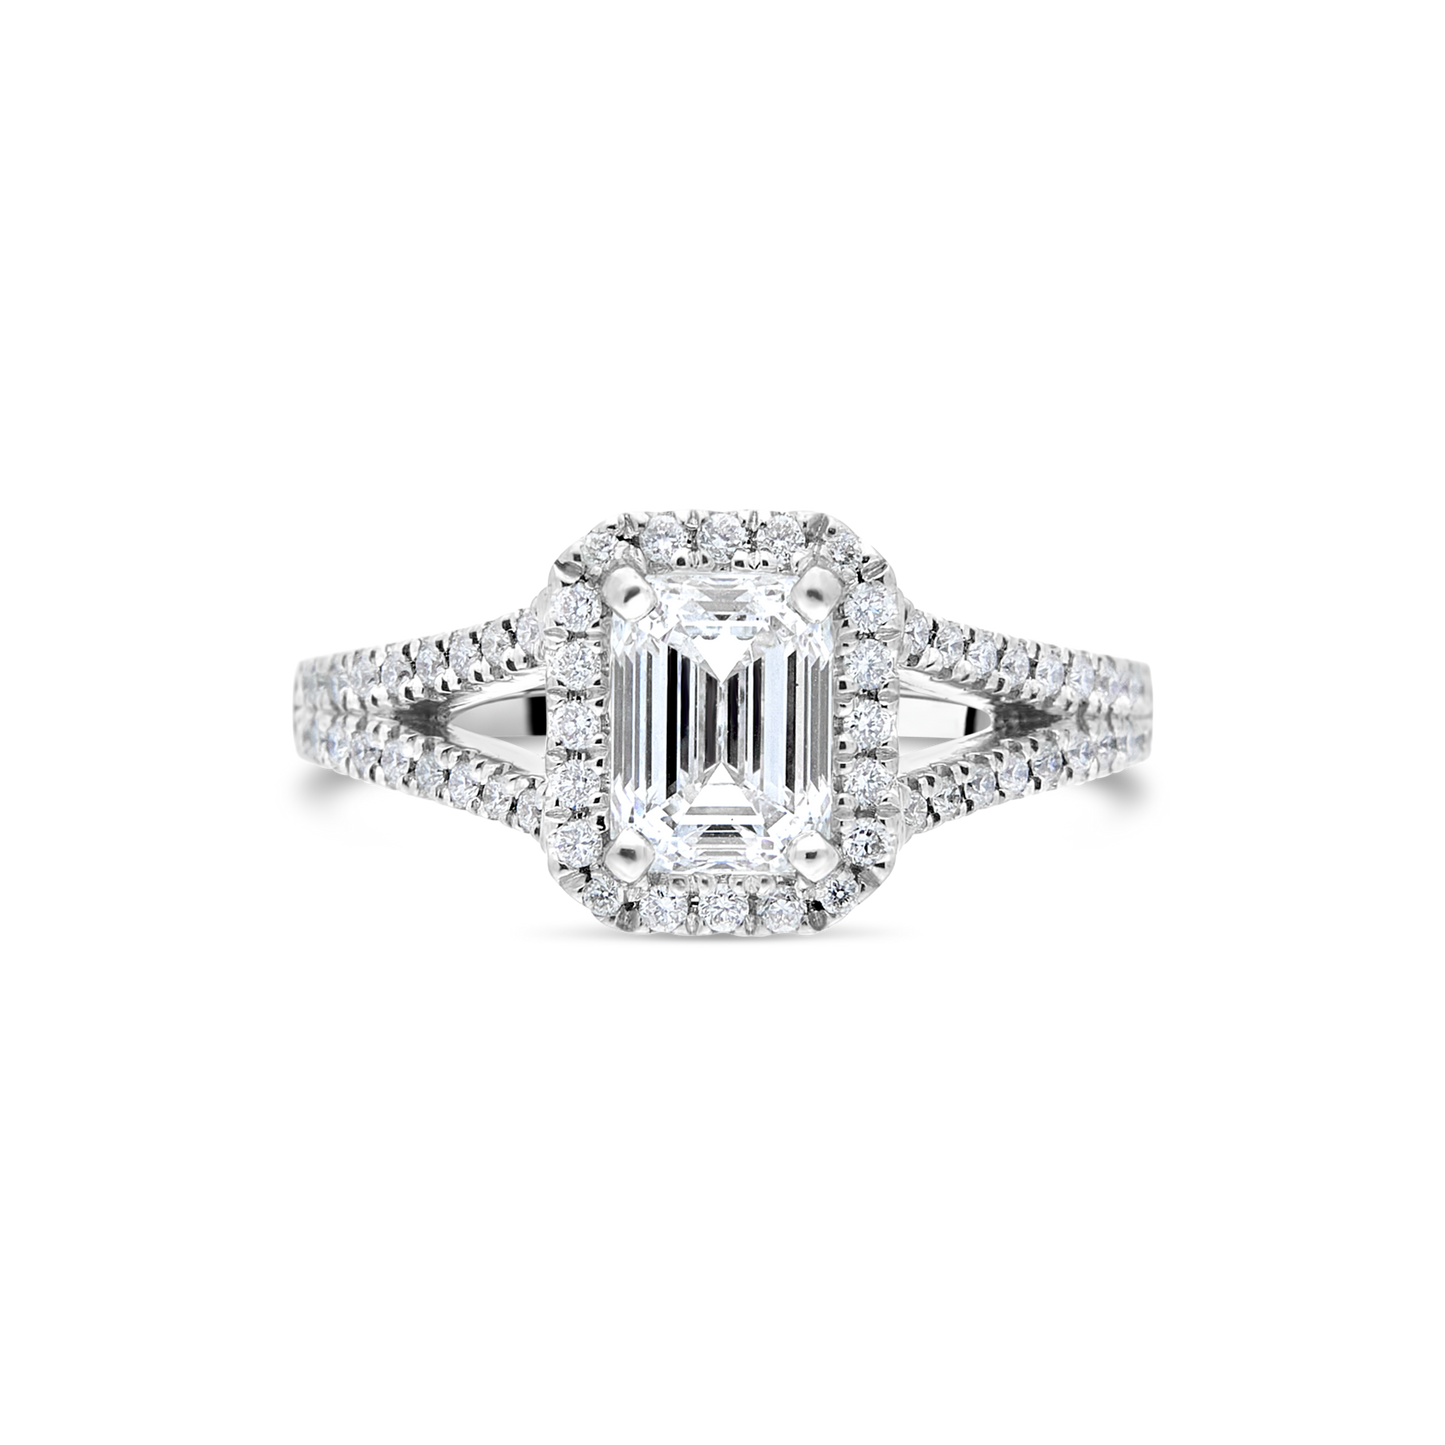 The "Ascendance" with Emerald Cut Platinum, 0.97ct total